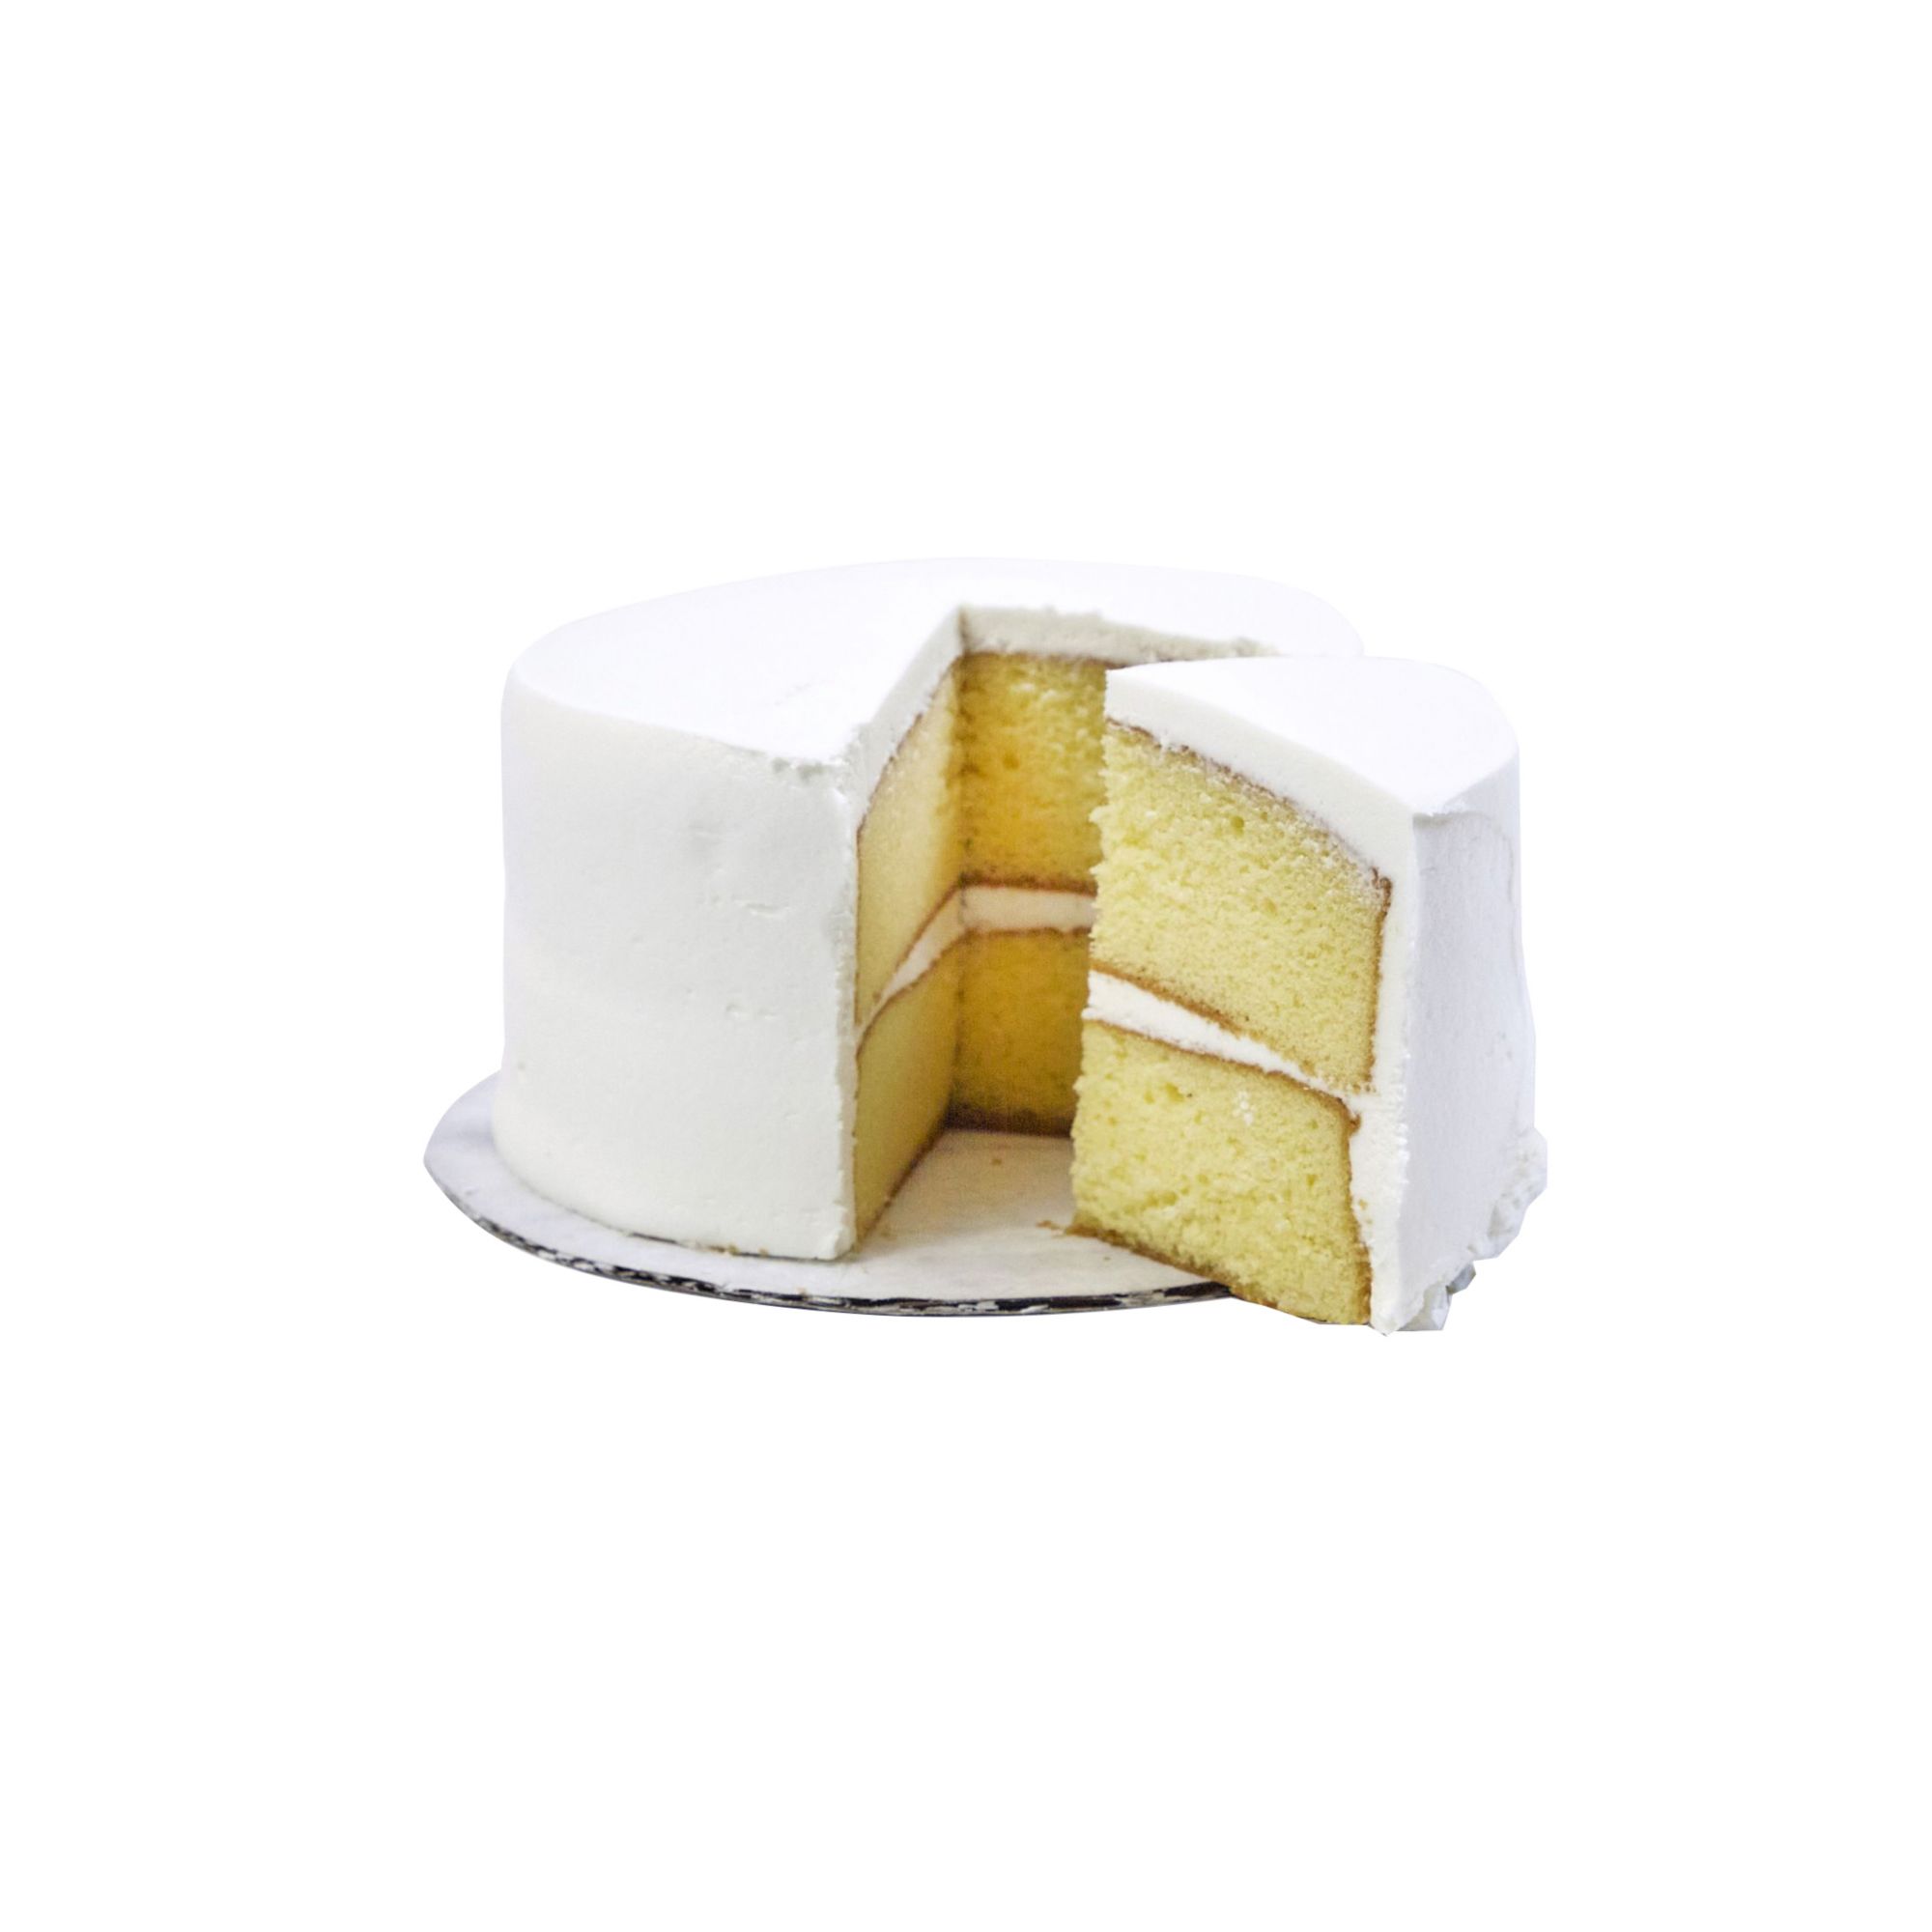 Wellsley Farms 5&quot; Round Gold Cake, Serves 6